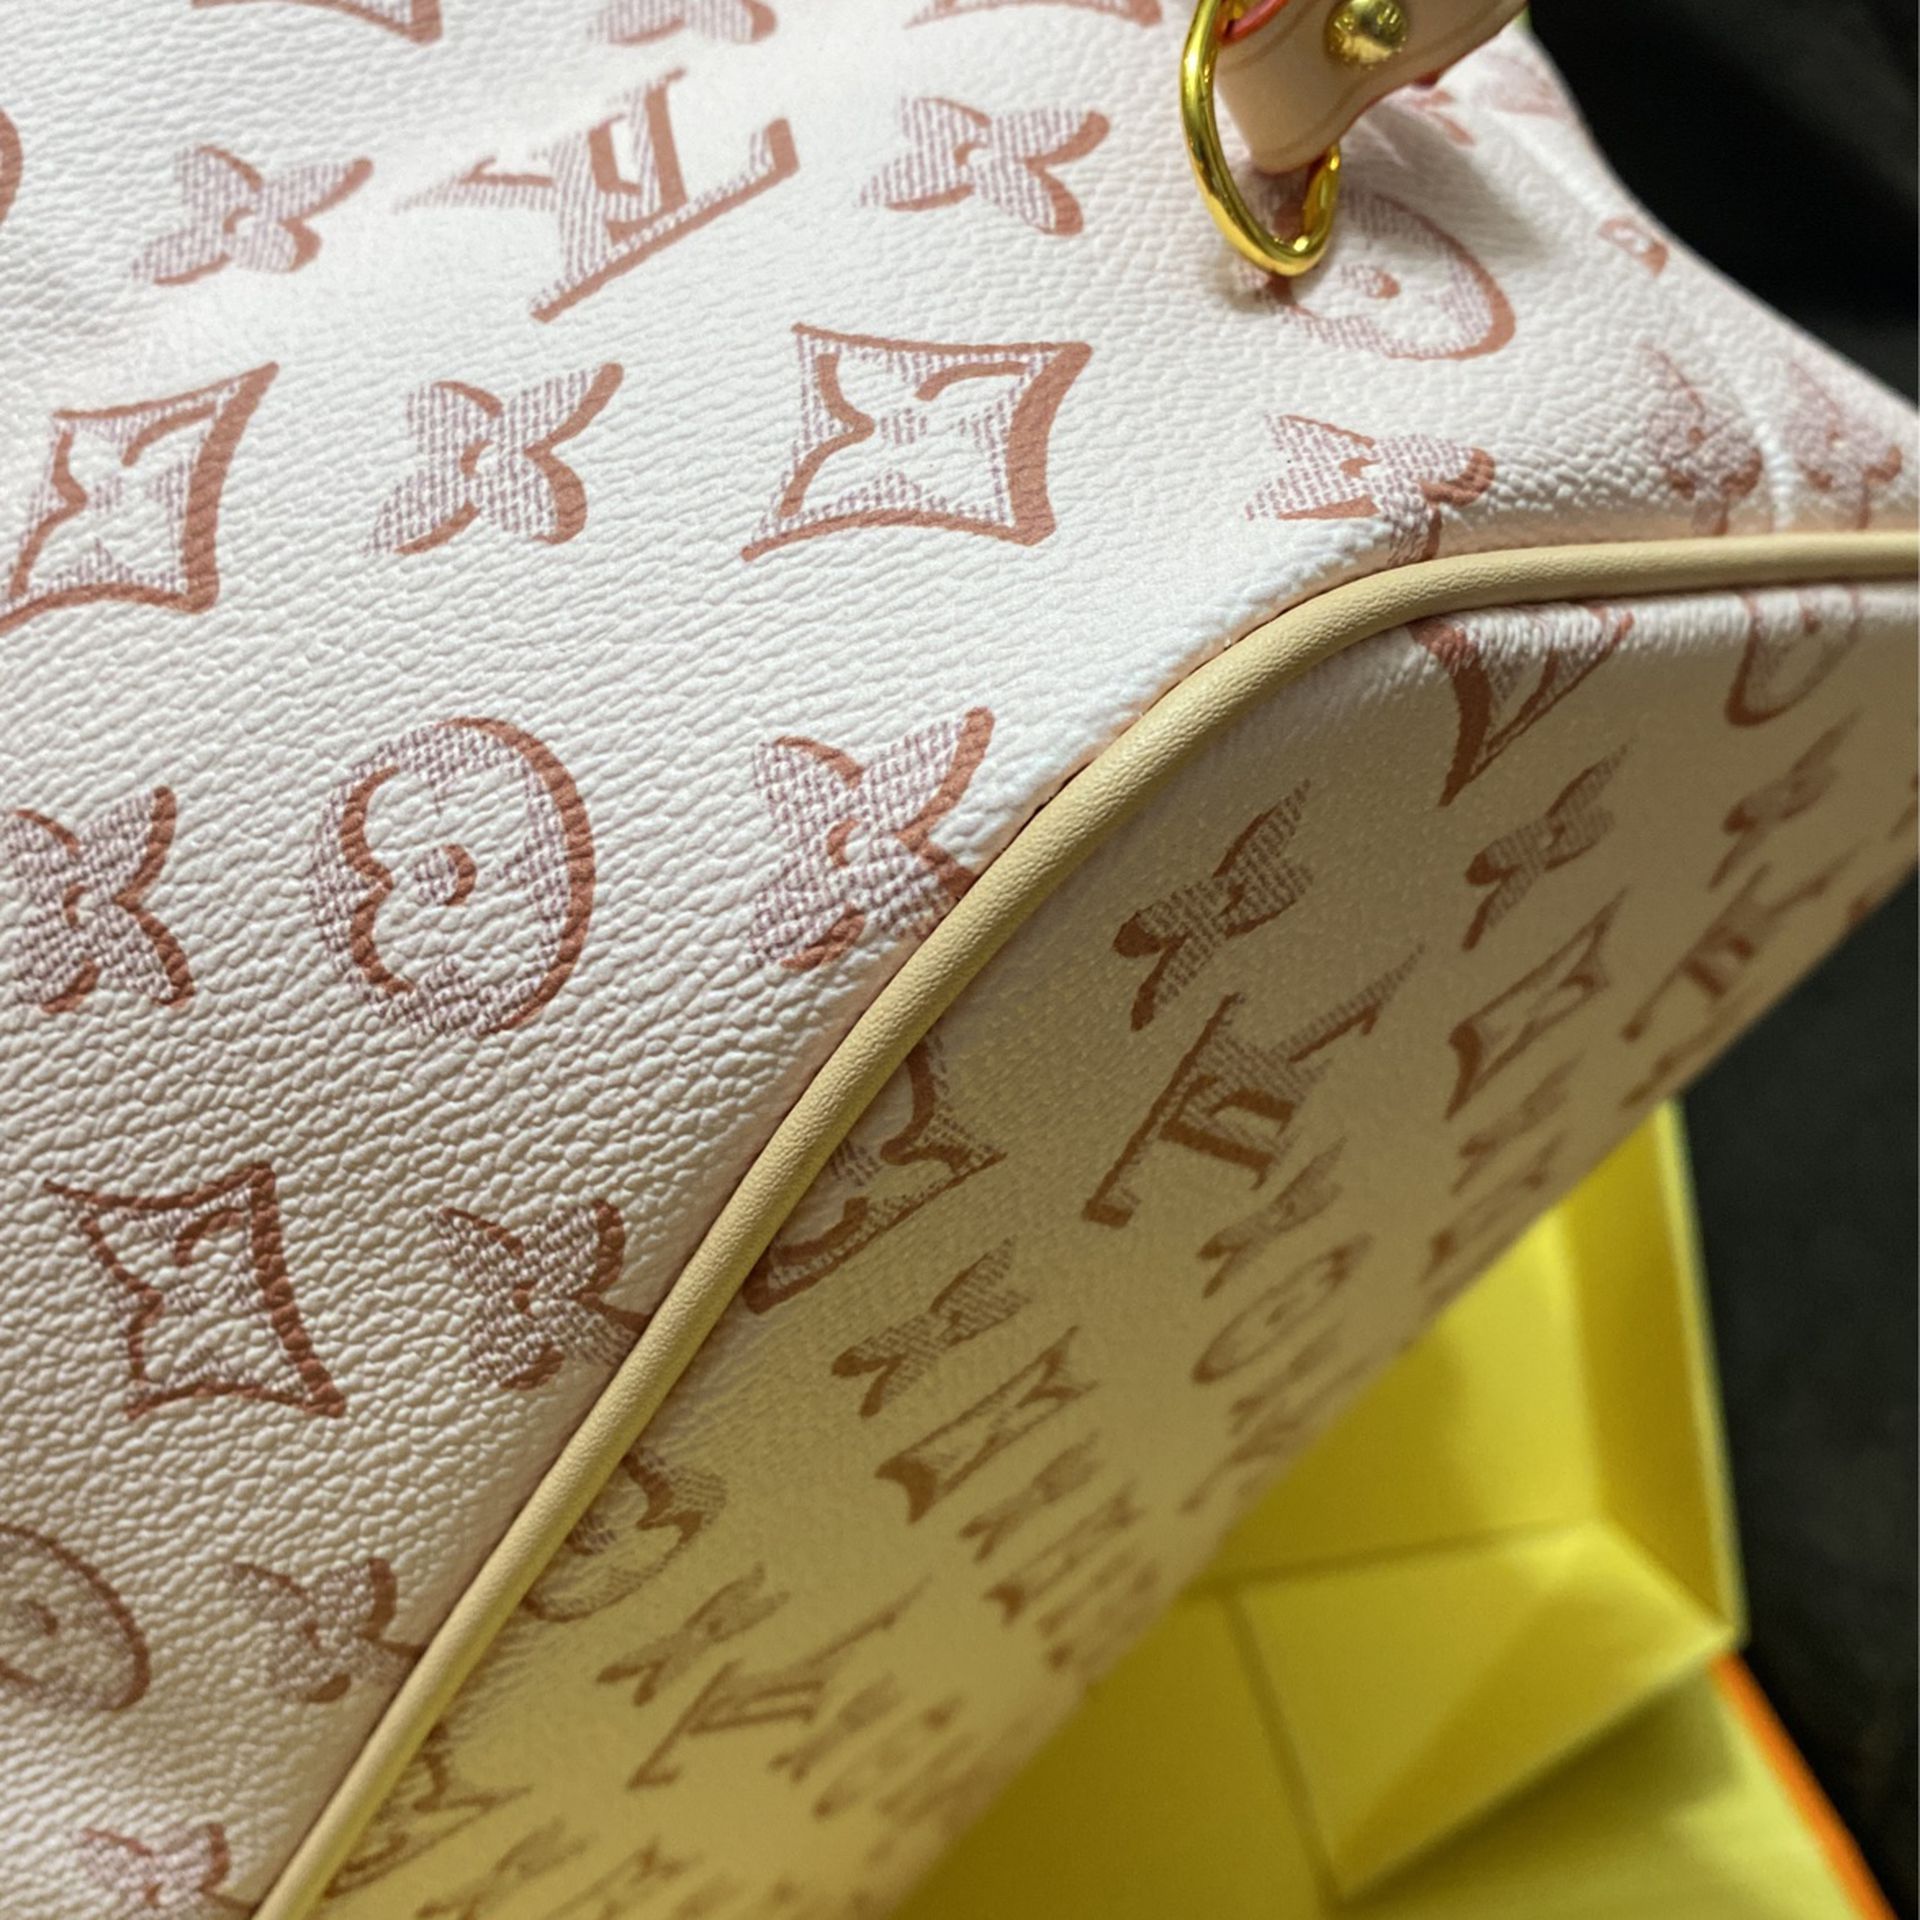 Hot Pink Graffiti Neverfull for Sale in Fremont, CA - OfferUp